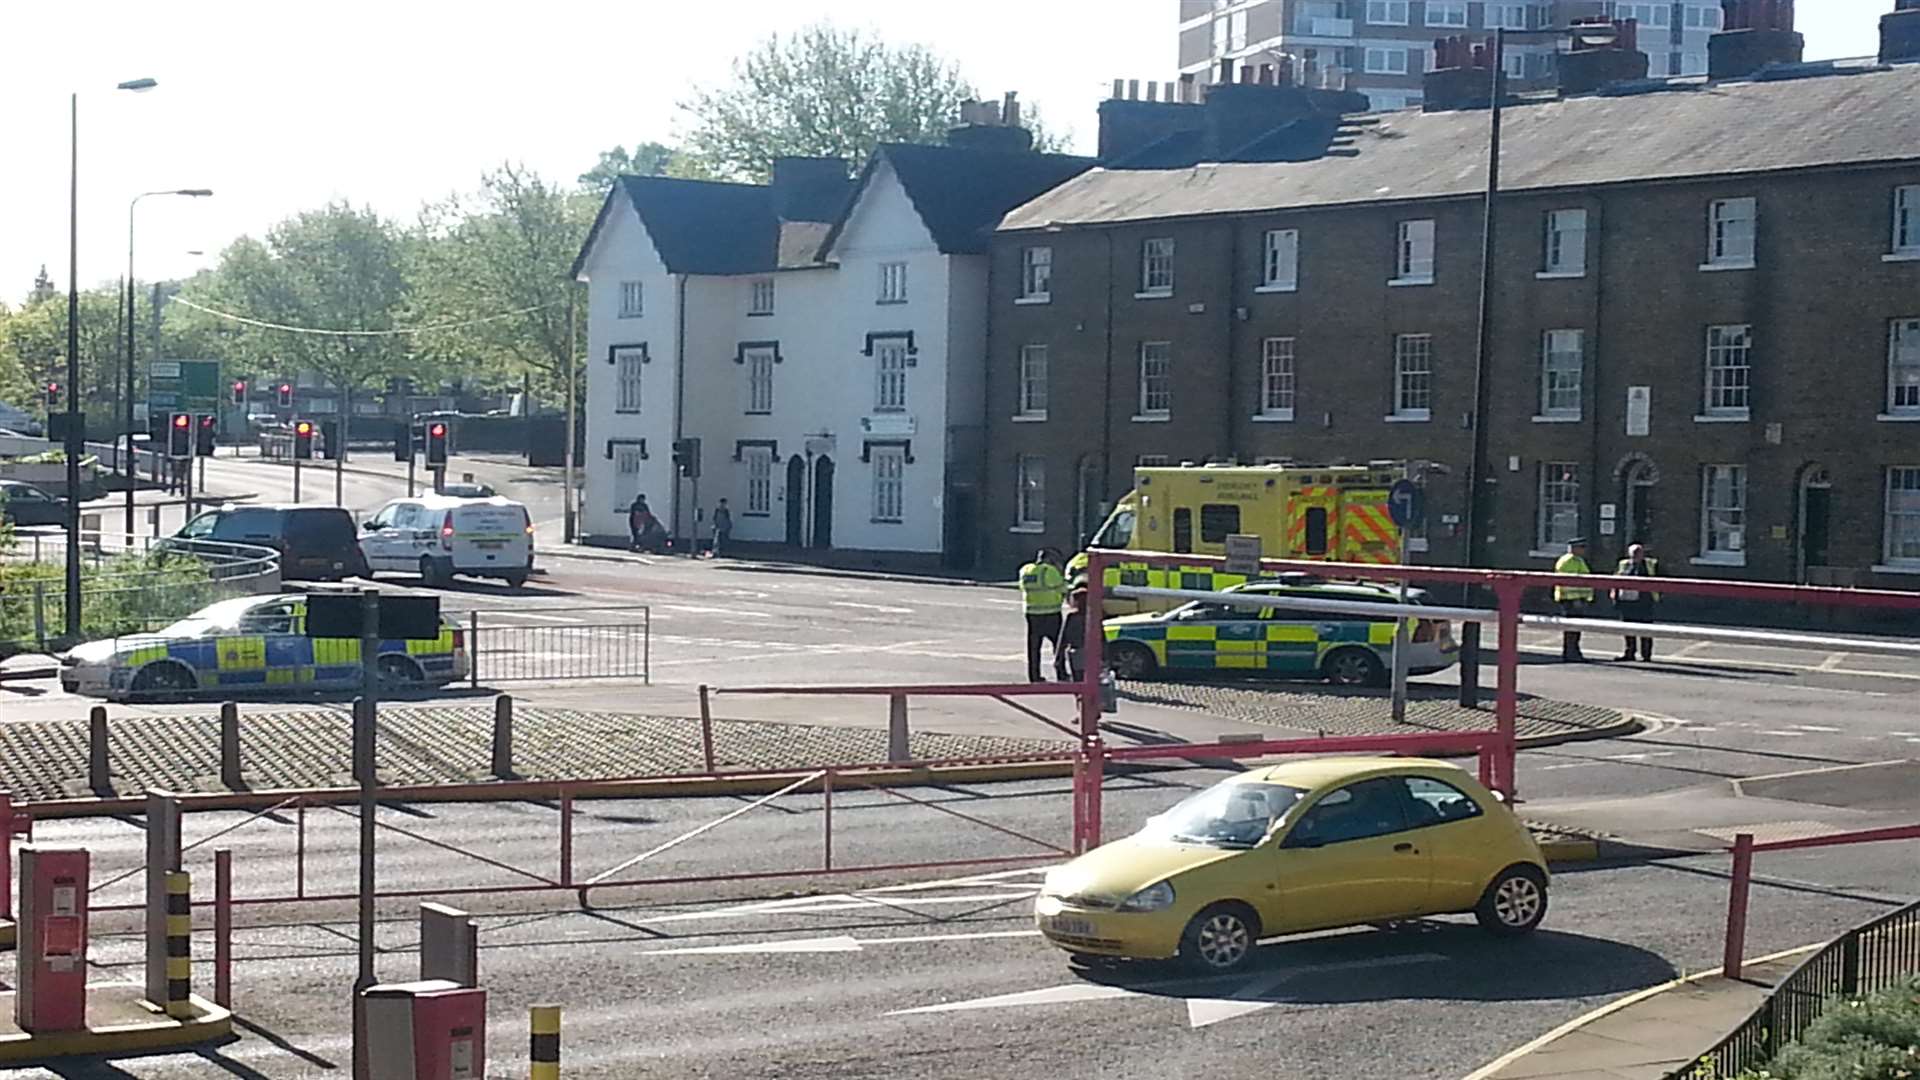 Emergency services were called to the incident in Pads Hill, Maidstone.